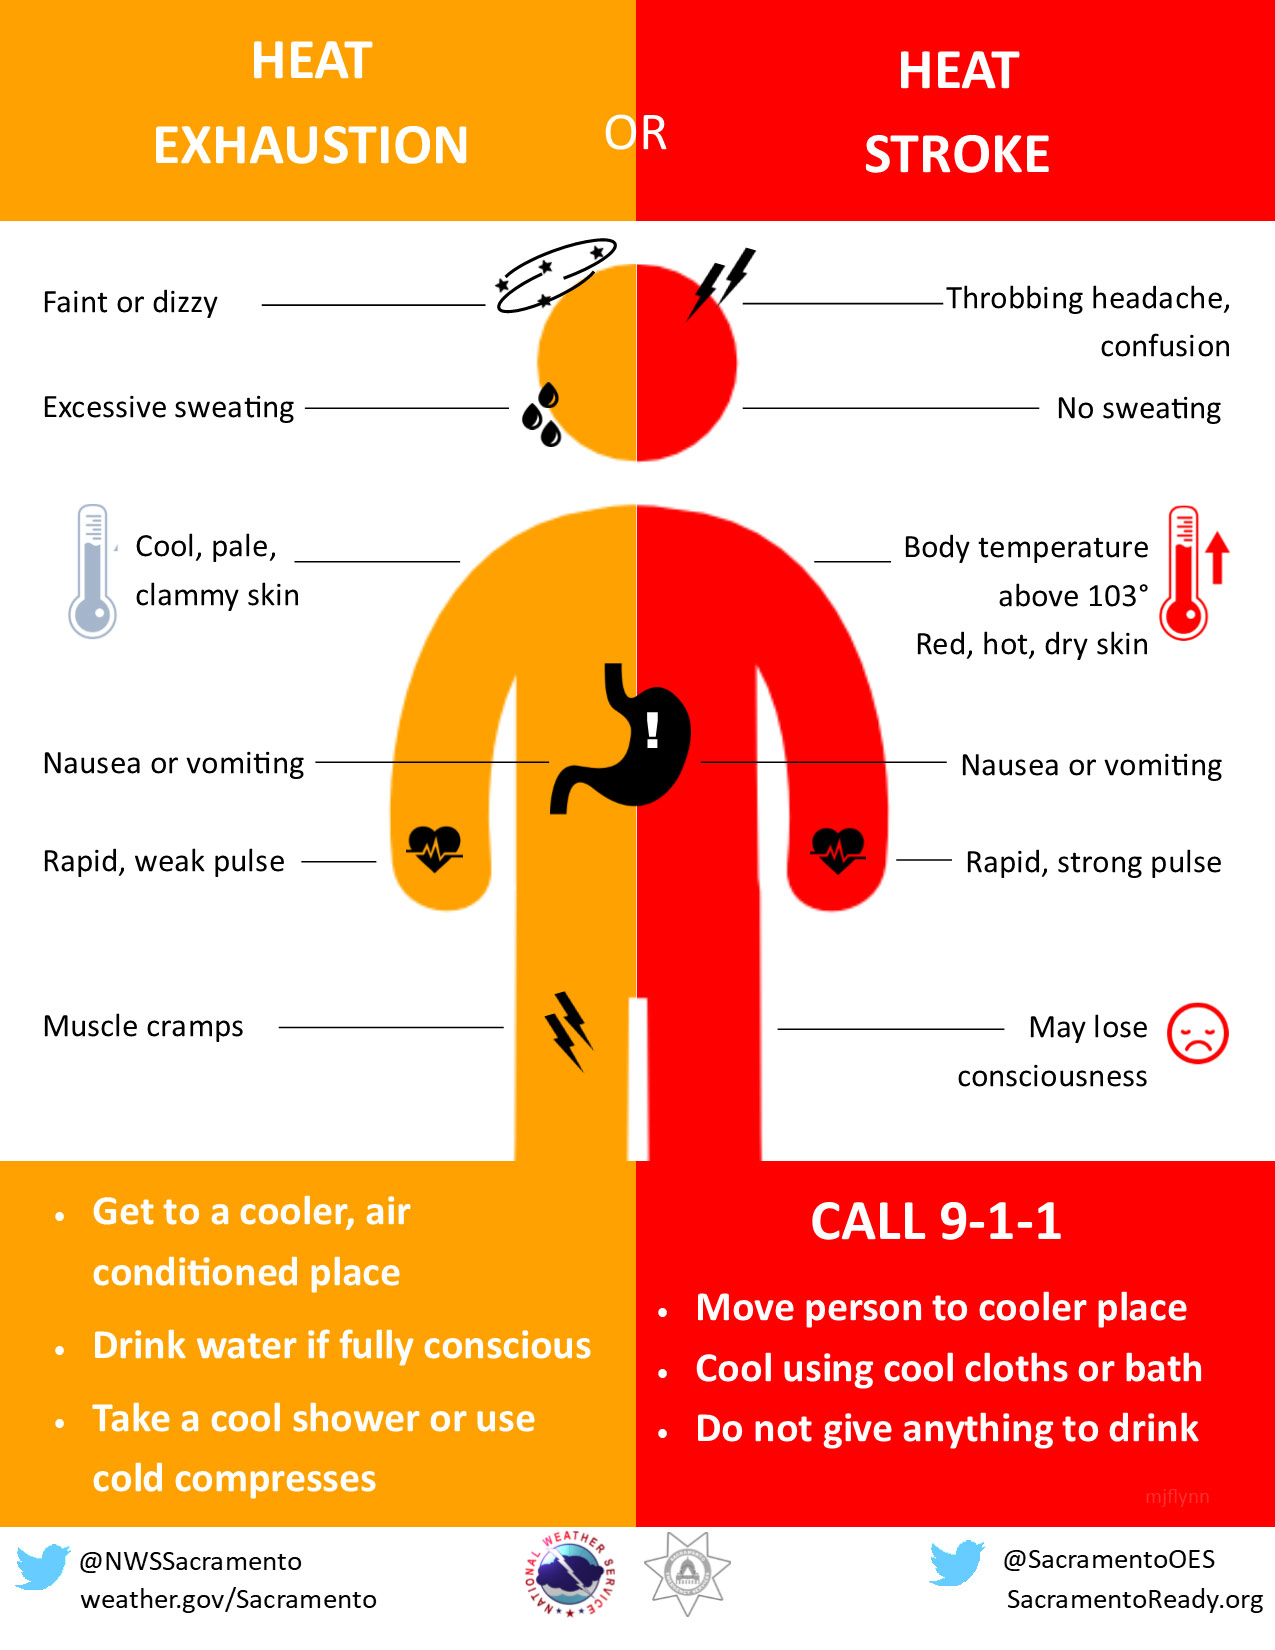 Heat Symptoms:Heat Exhaustion: faint or dizzy; excessive sweating; cool, pale, clammy skin; nausea or vomiting; rapid, weak pulse; muscle cramps. Get to a cooler, air conditioned place. Drink water if fully conscious. Take a cool shower or use cold compress.Heat Stroke: throbbing headache; no sweating; body temperature above 103 degrees; red, hot, dry skin; nausea or vomiting; rapid, strong pulse; you may lose consciousness.  Call 911 - take immediate action to cool the person until help arrives.